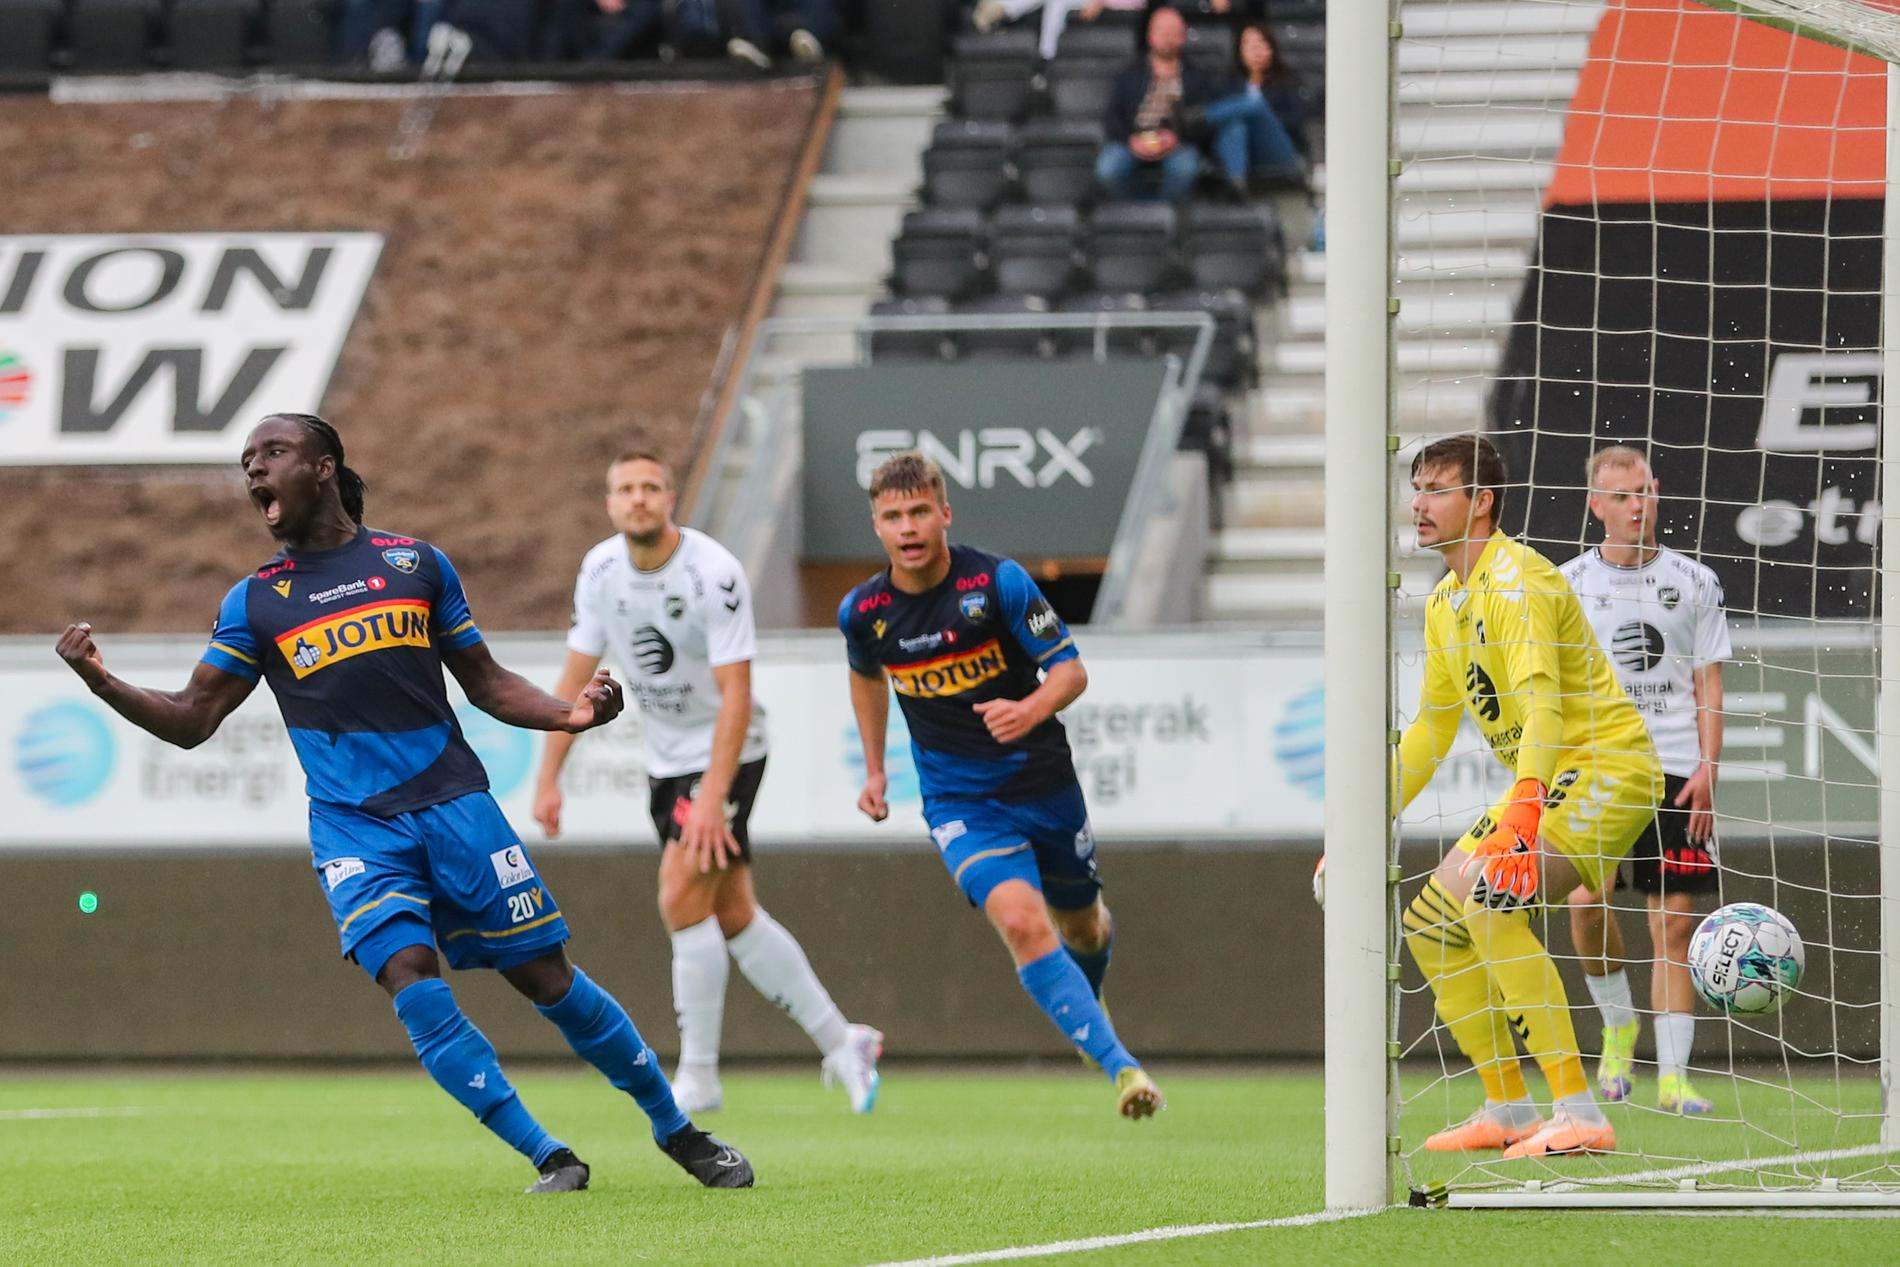 Double win: Sandefjord's Franklin Nineto celebrated after giving Sandefjord the lead against Per Kristian Bråtveit and Odd.  Bråtveit conceded another goal before half-time and it was 2-2 when he had to leave.  The home team won 3-2.  Photo: Trond R.  Teigen/NTB